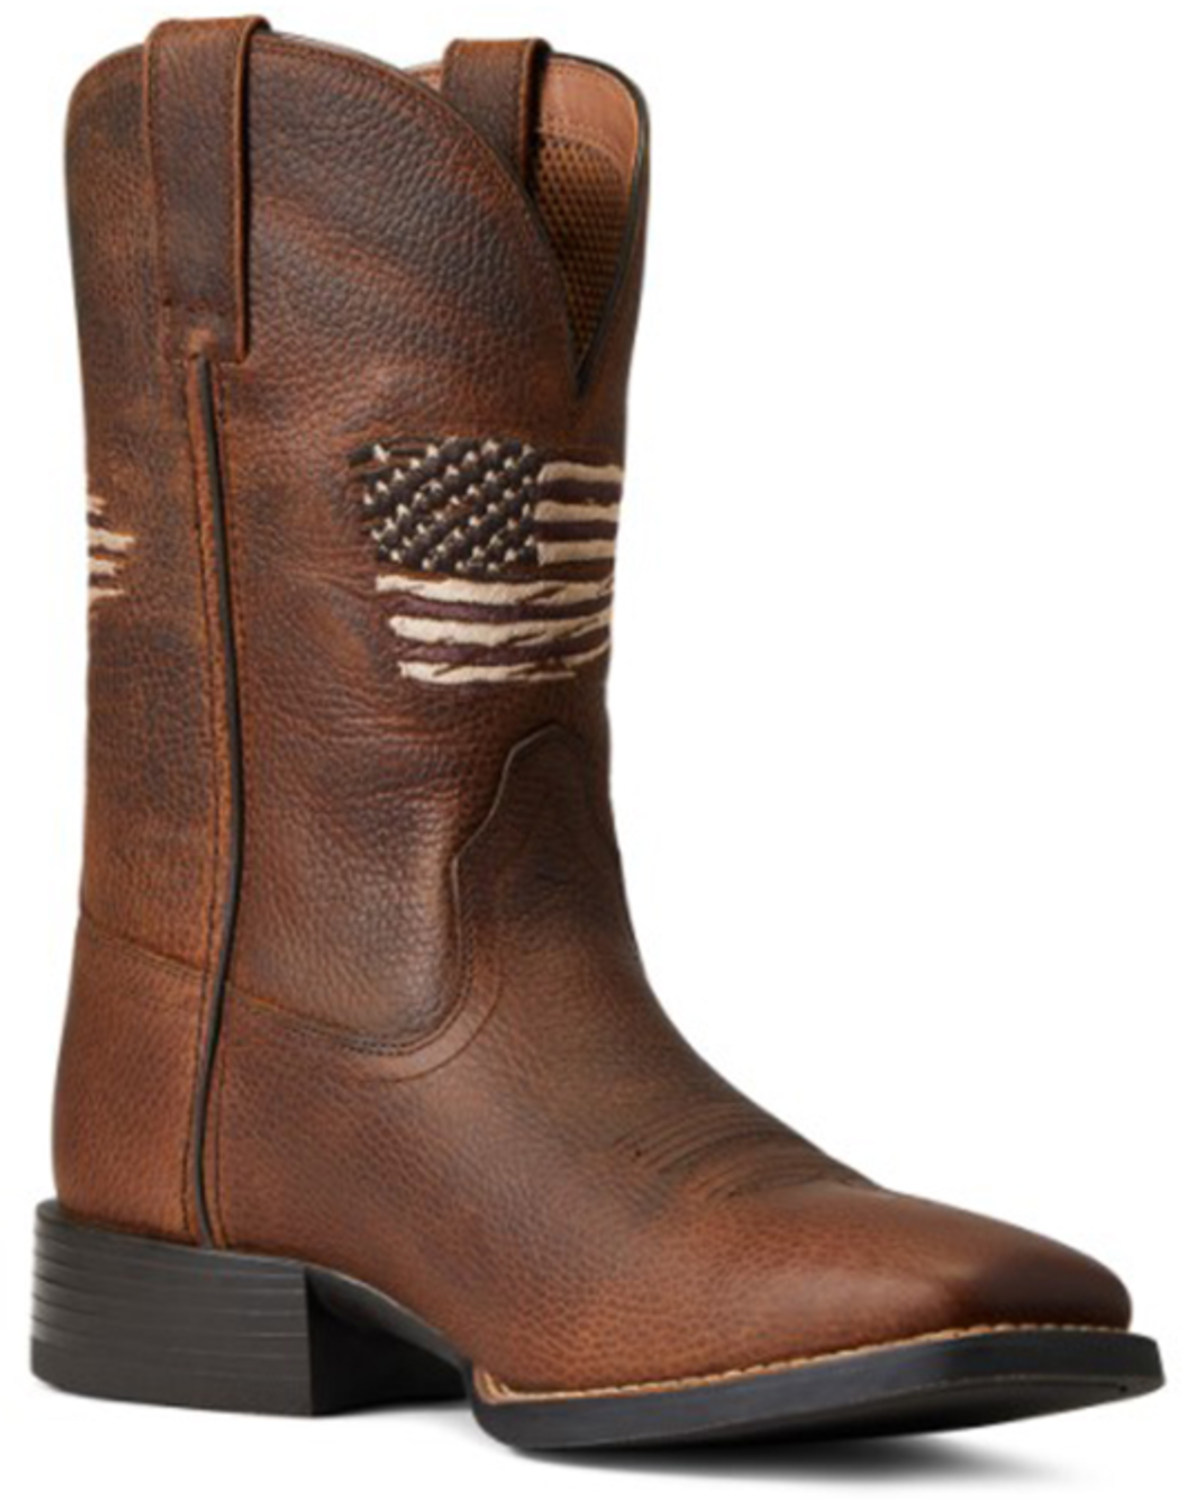 Ariat Men's Cliff Sport All Country Western Performance Boots - Broad Square Toe